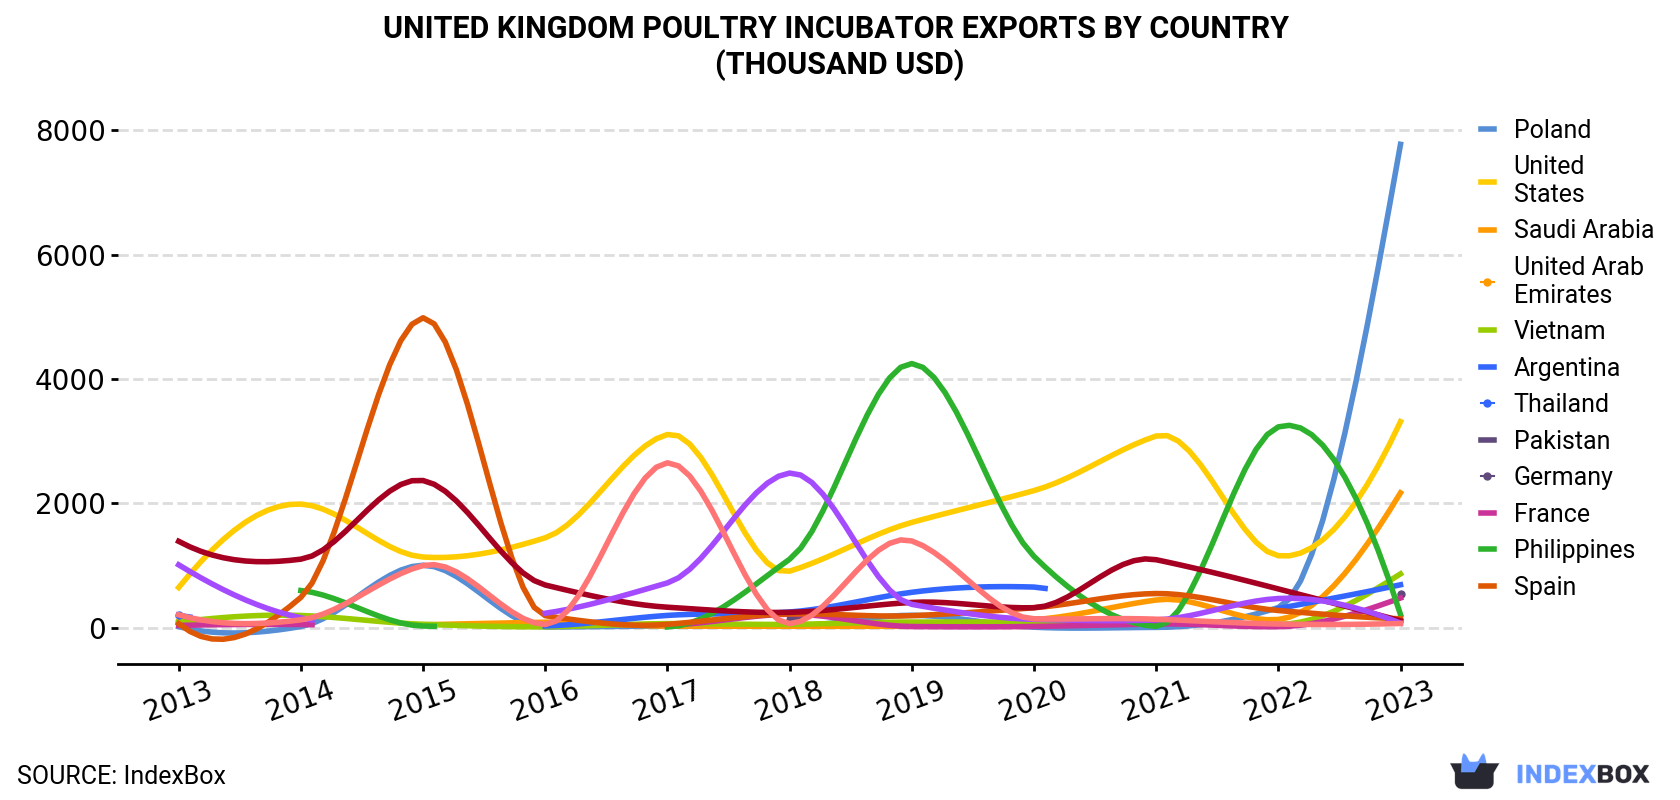 United Kingdom Poultry Incubator Exports By Country (Thousand USD)